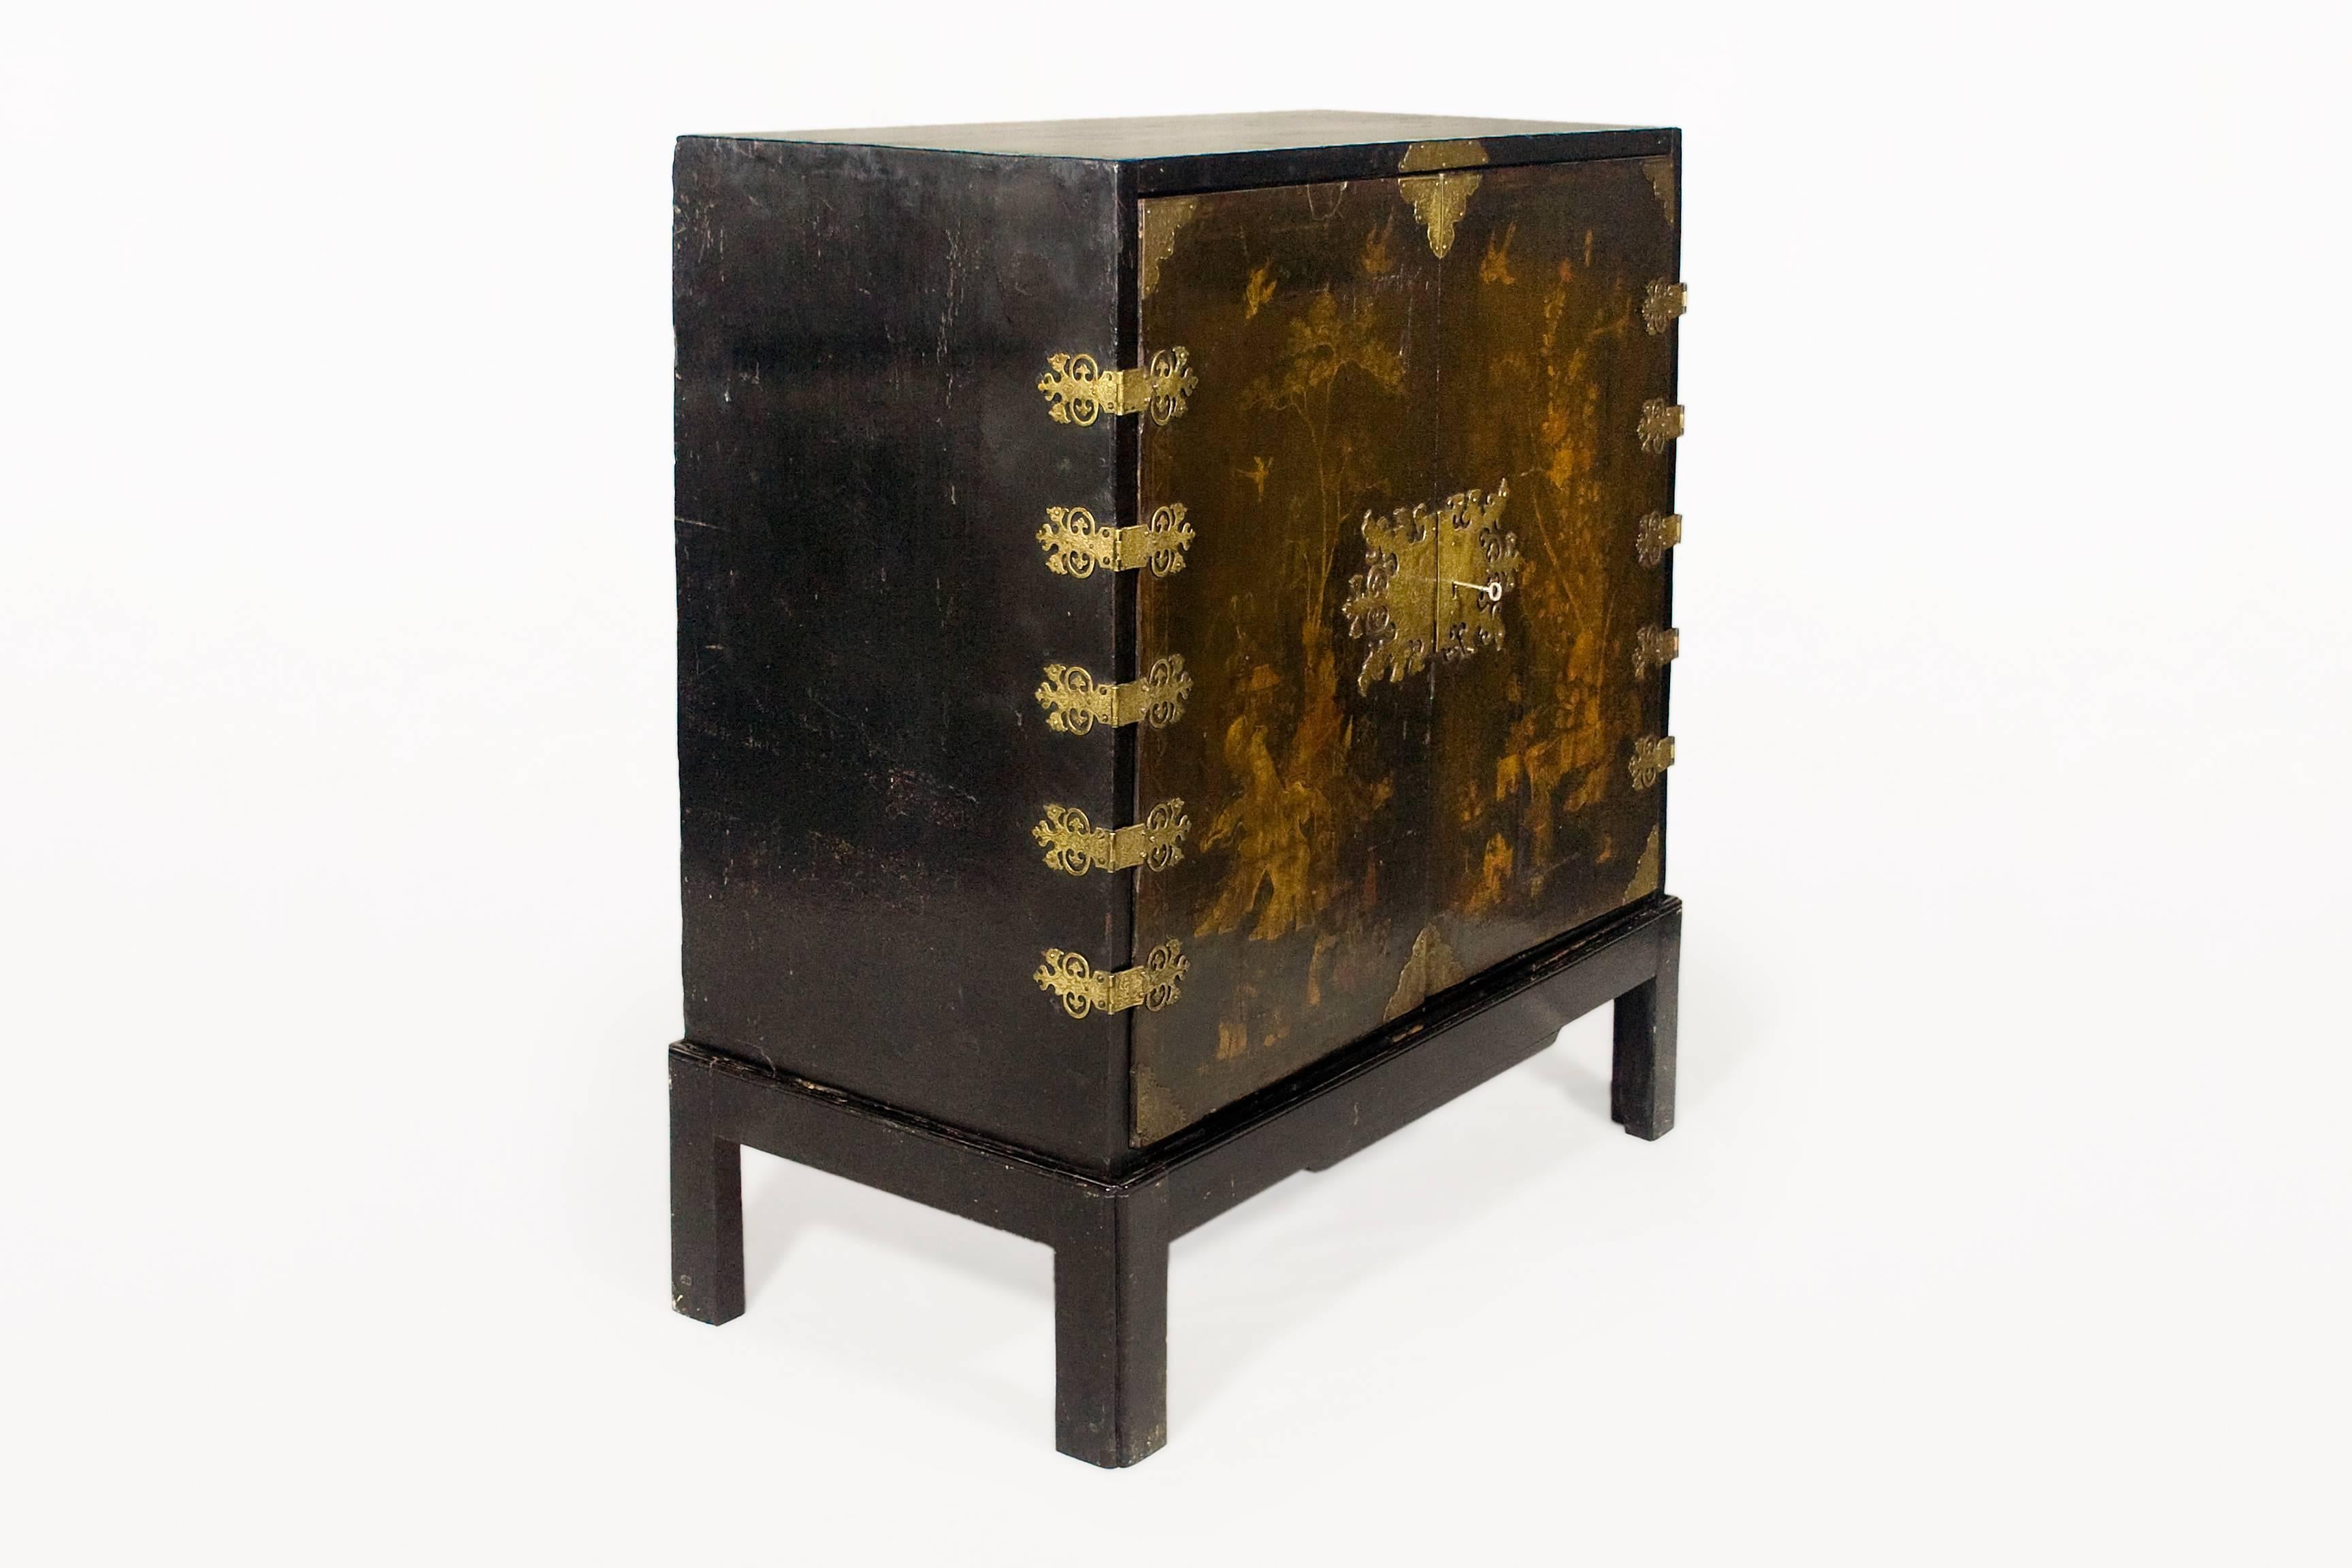 William and Mary English Lacquered Cabinet on a Contemporary Base, circa 1700, England